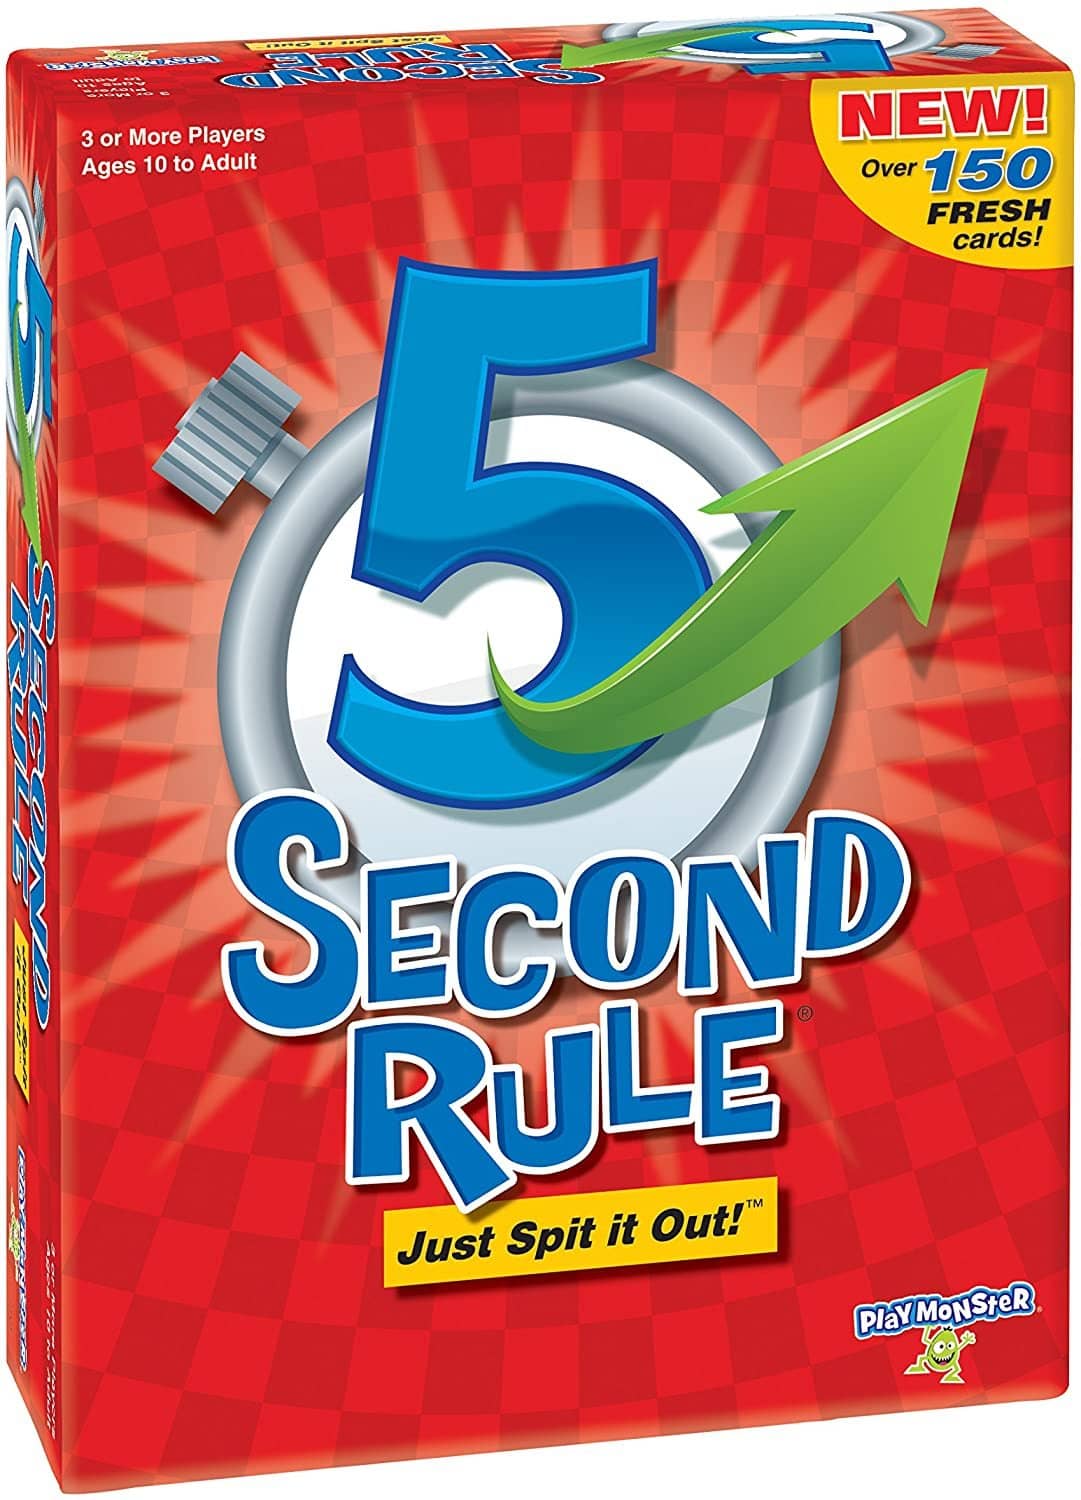 5 Second Rule Game 2Nd Edition-Kidding Around NYC